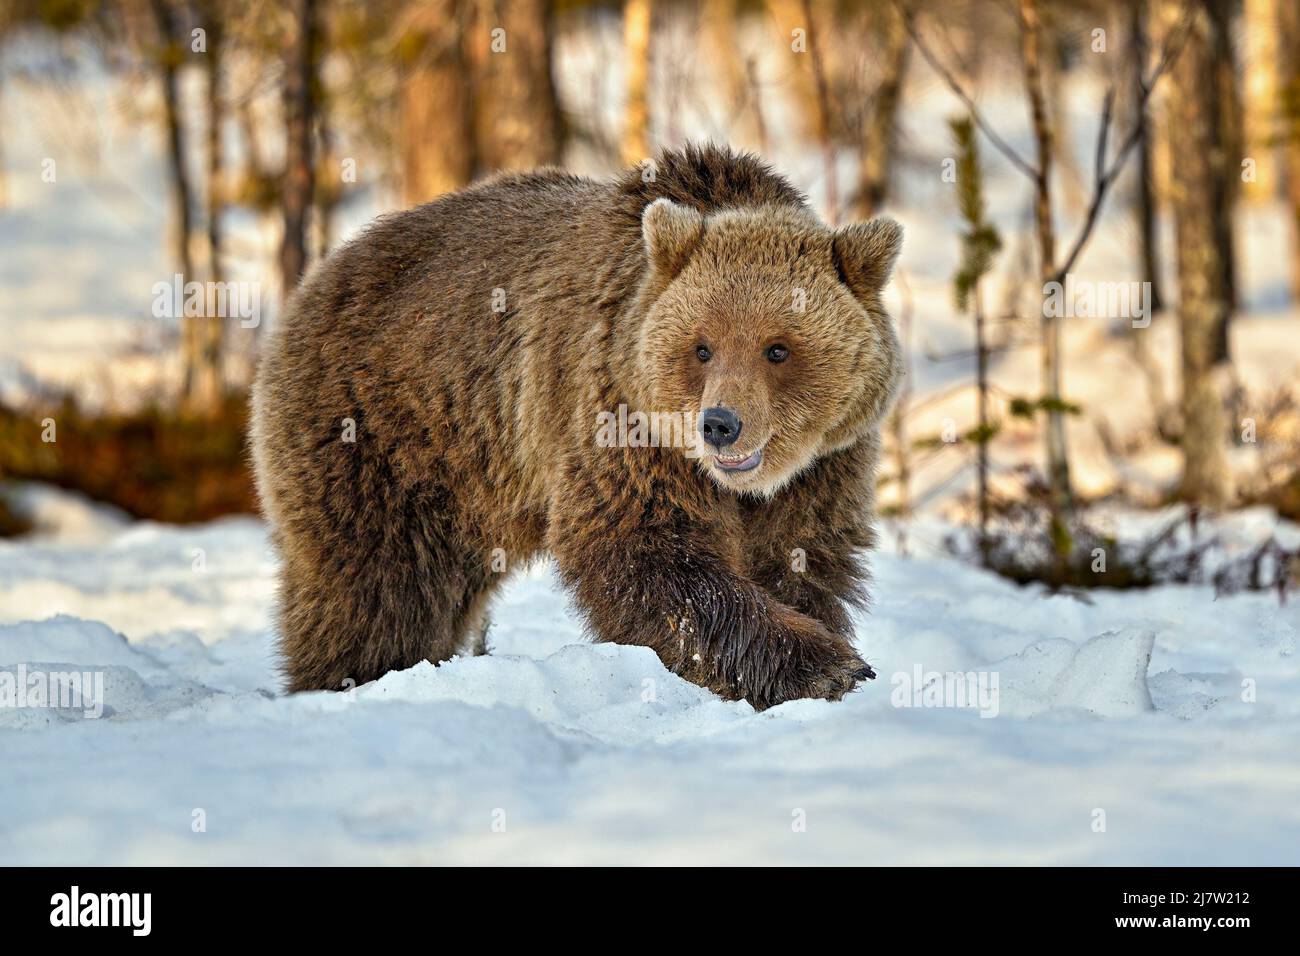 Bear which almost seems to be smiling Stock Photo